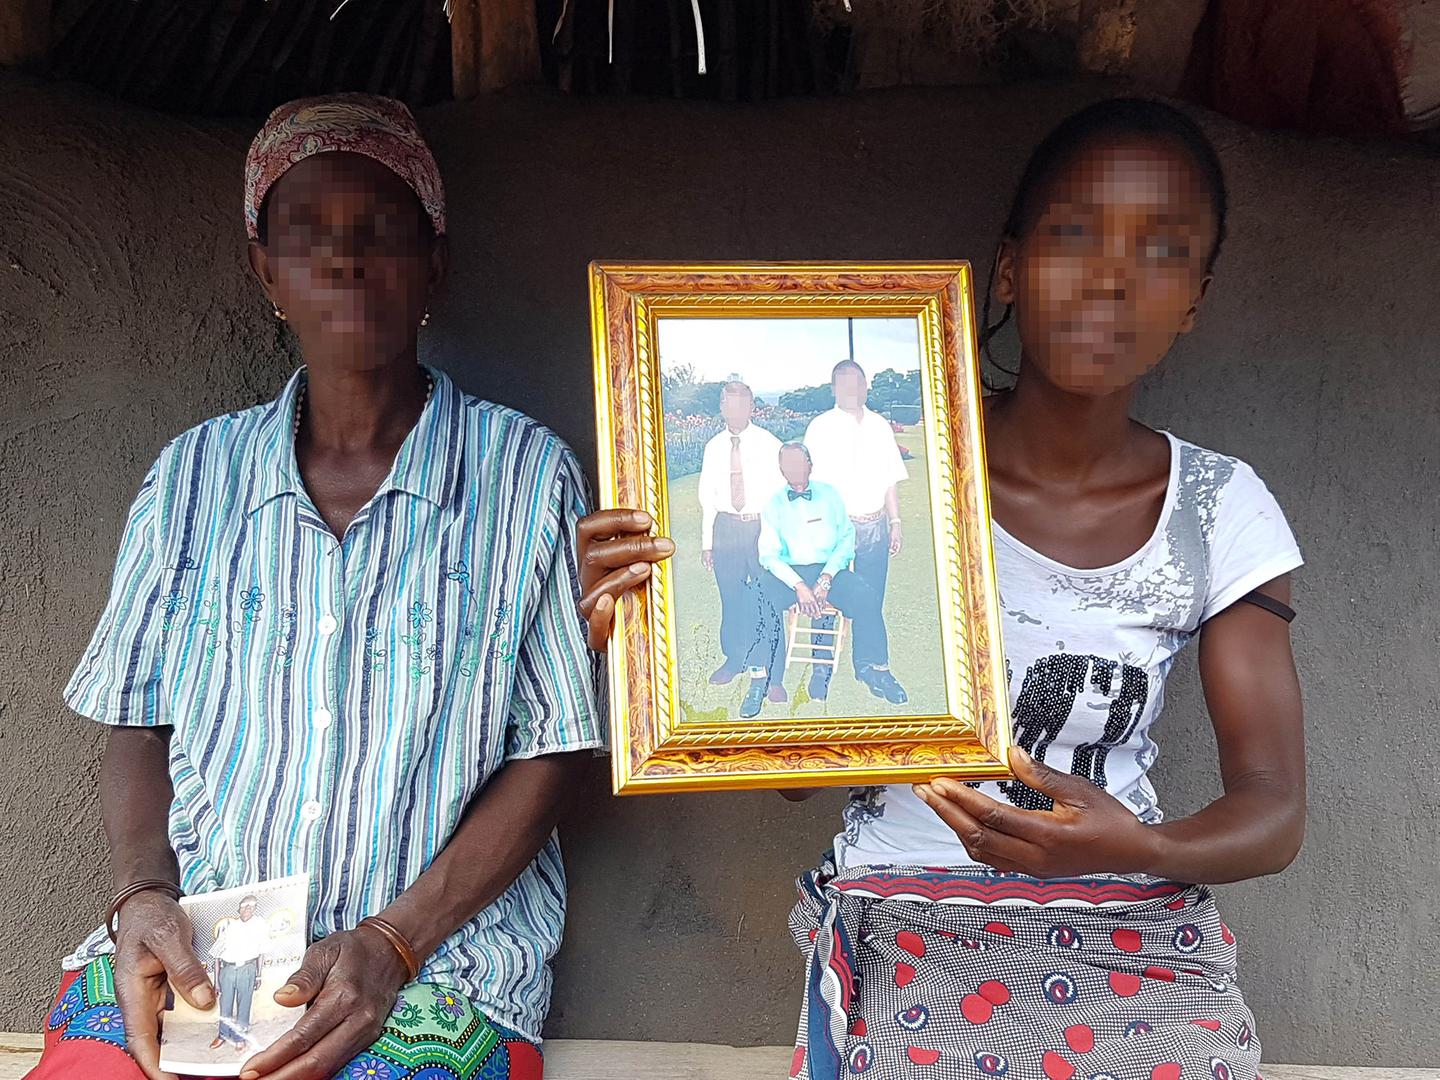 The wife and daughter of the regulo (traditional chief) of Muxungue, Makotori José Mafussi, show a photo of Mafussi (seated) and two relatives. Apparent Renamo fighters killed Mafussi at his home on July 21, 2016. 